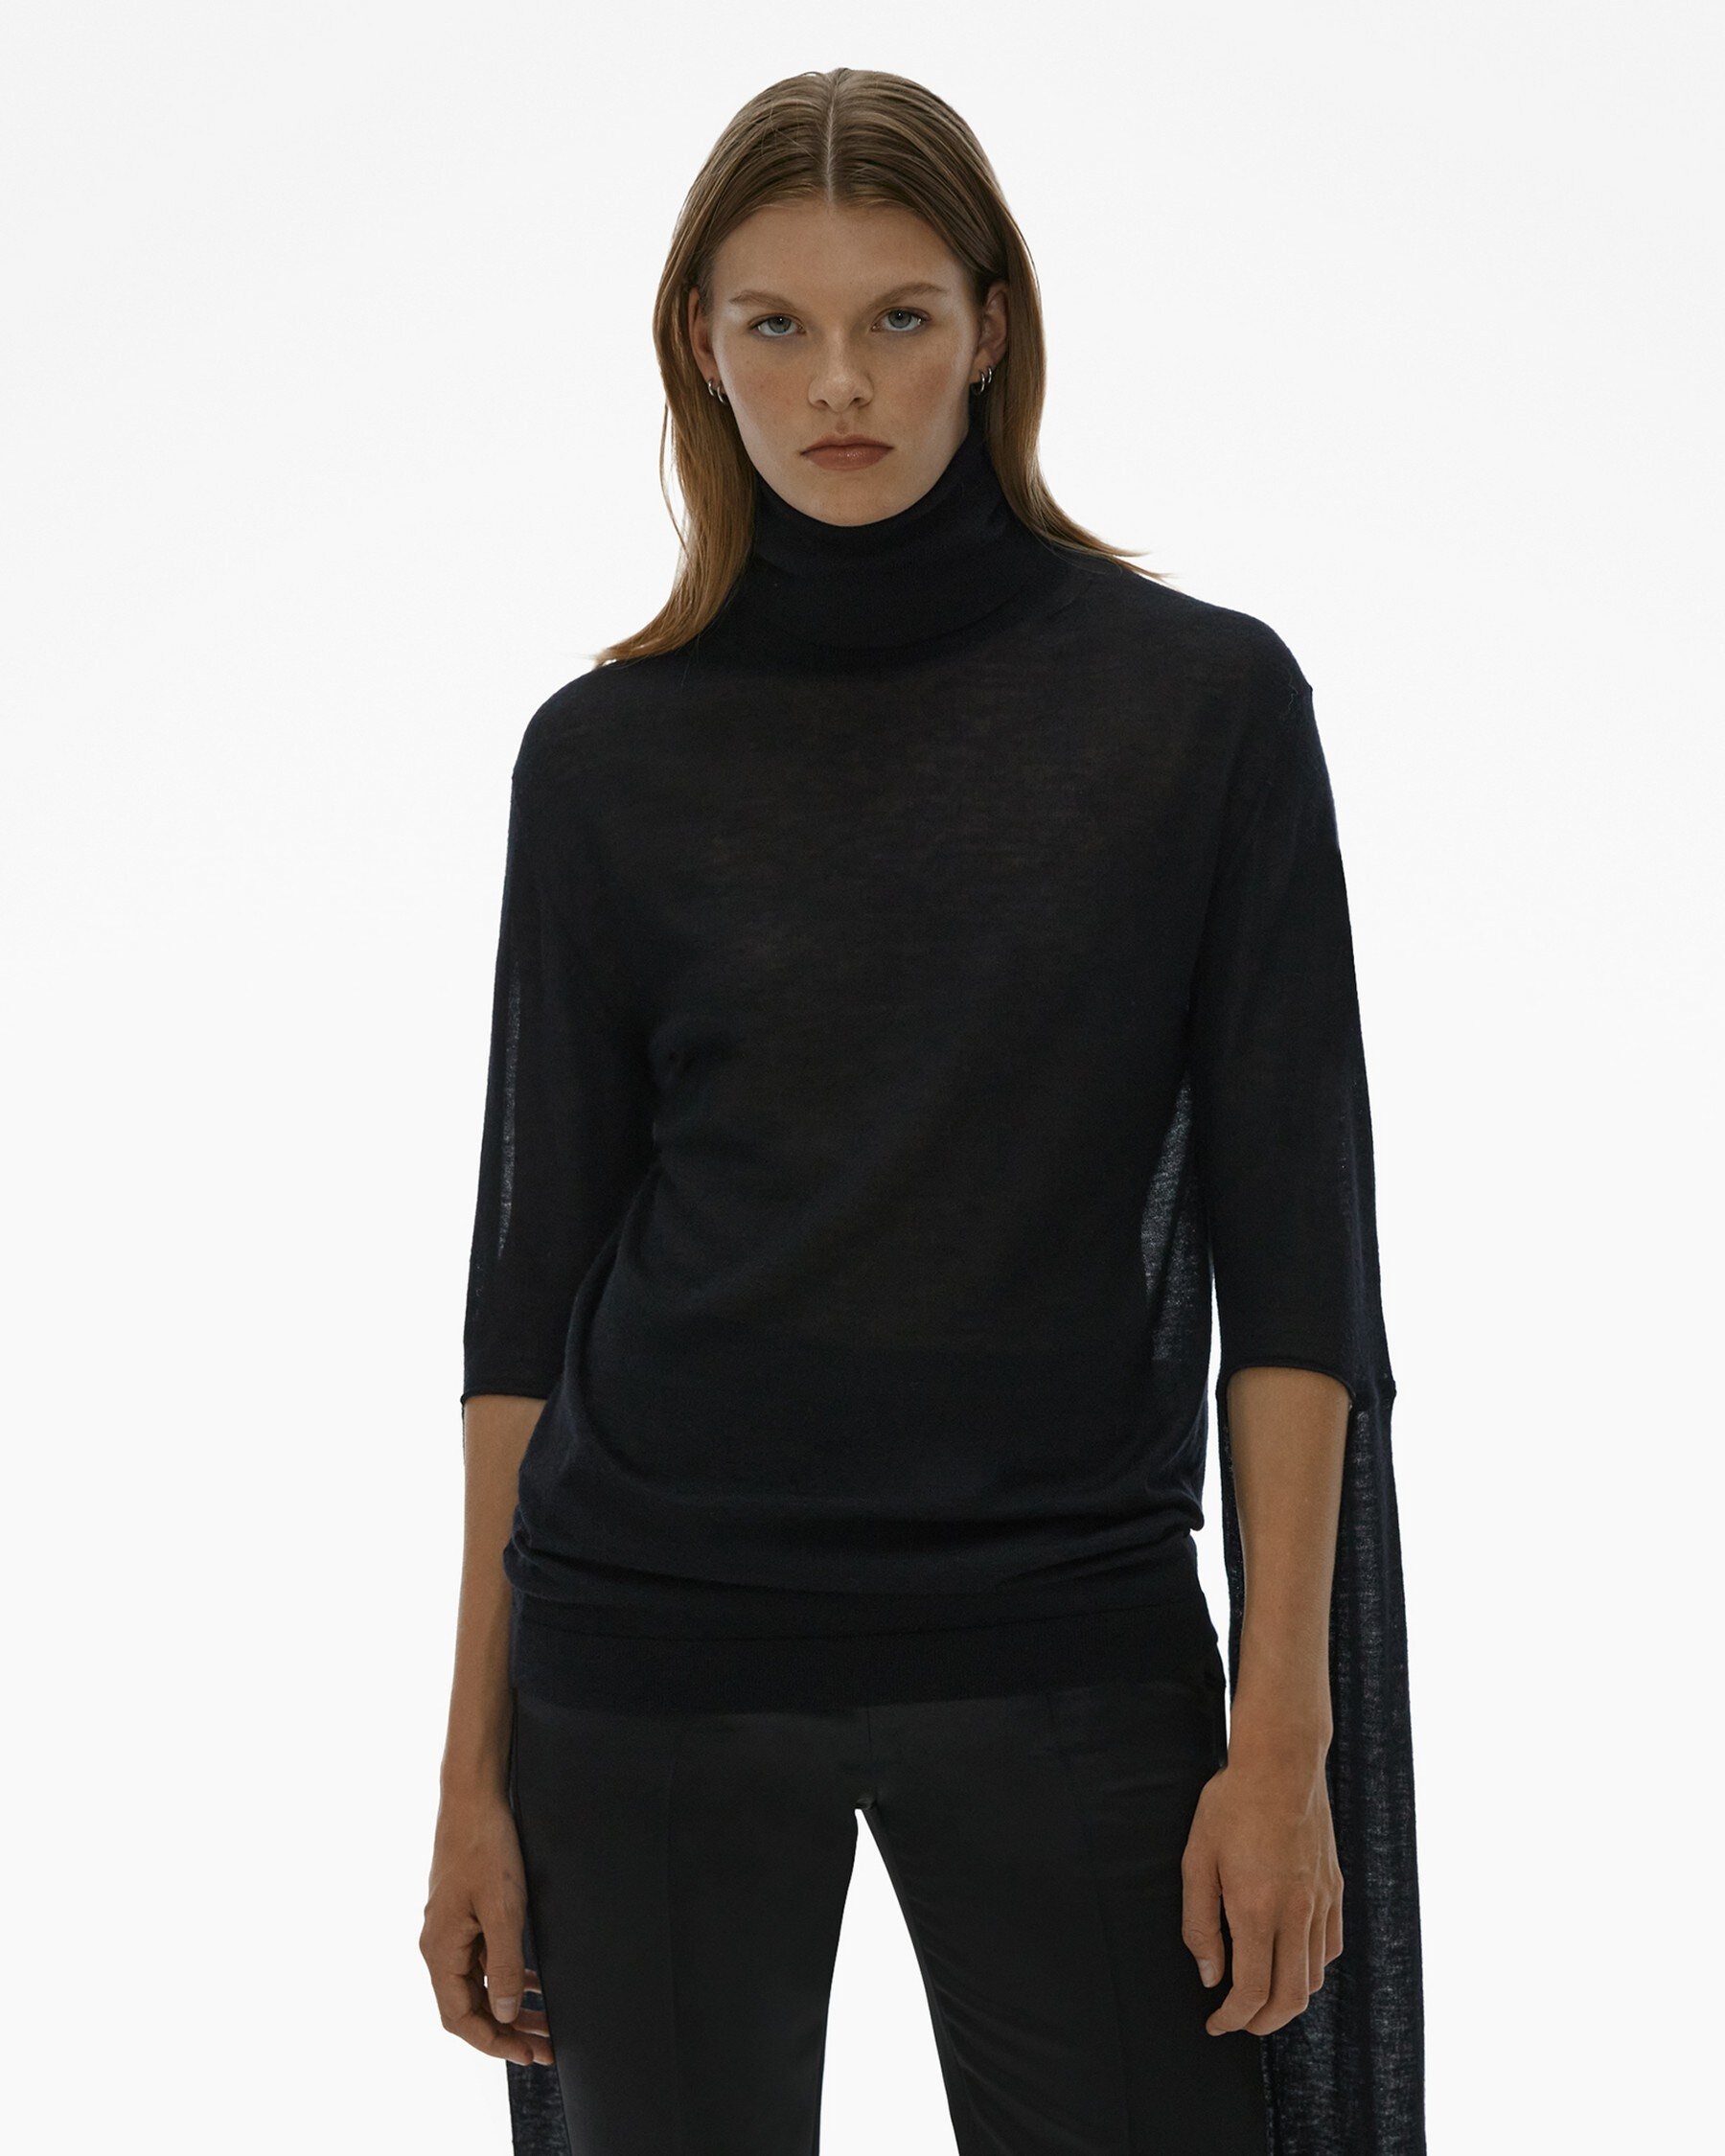 CUT-OUT TURTLENECK SWEATER - 3